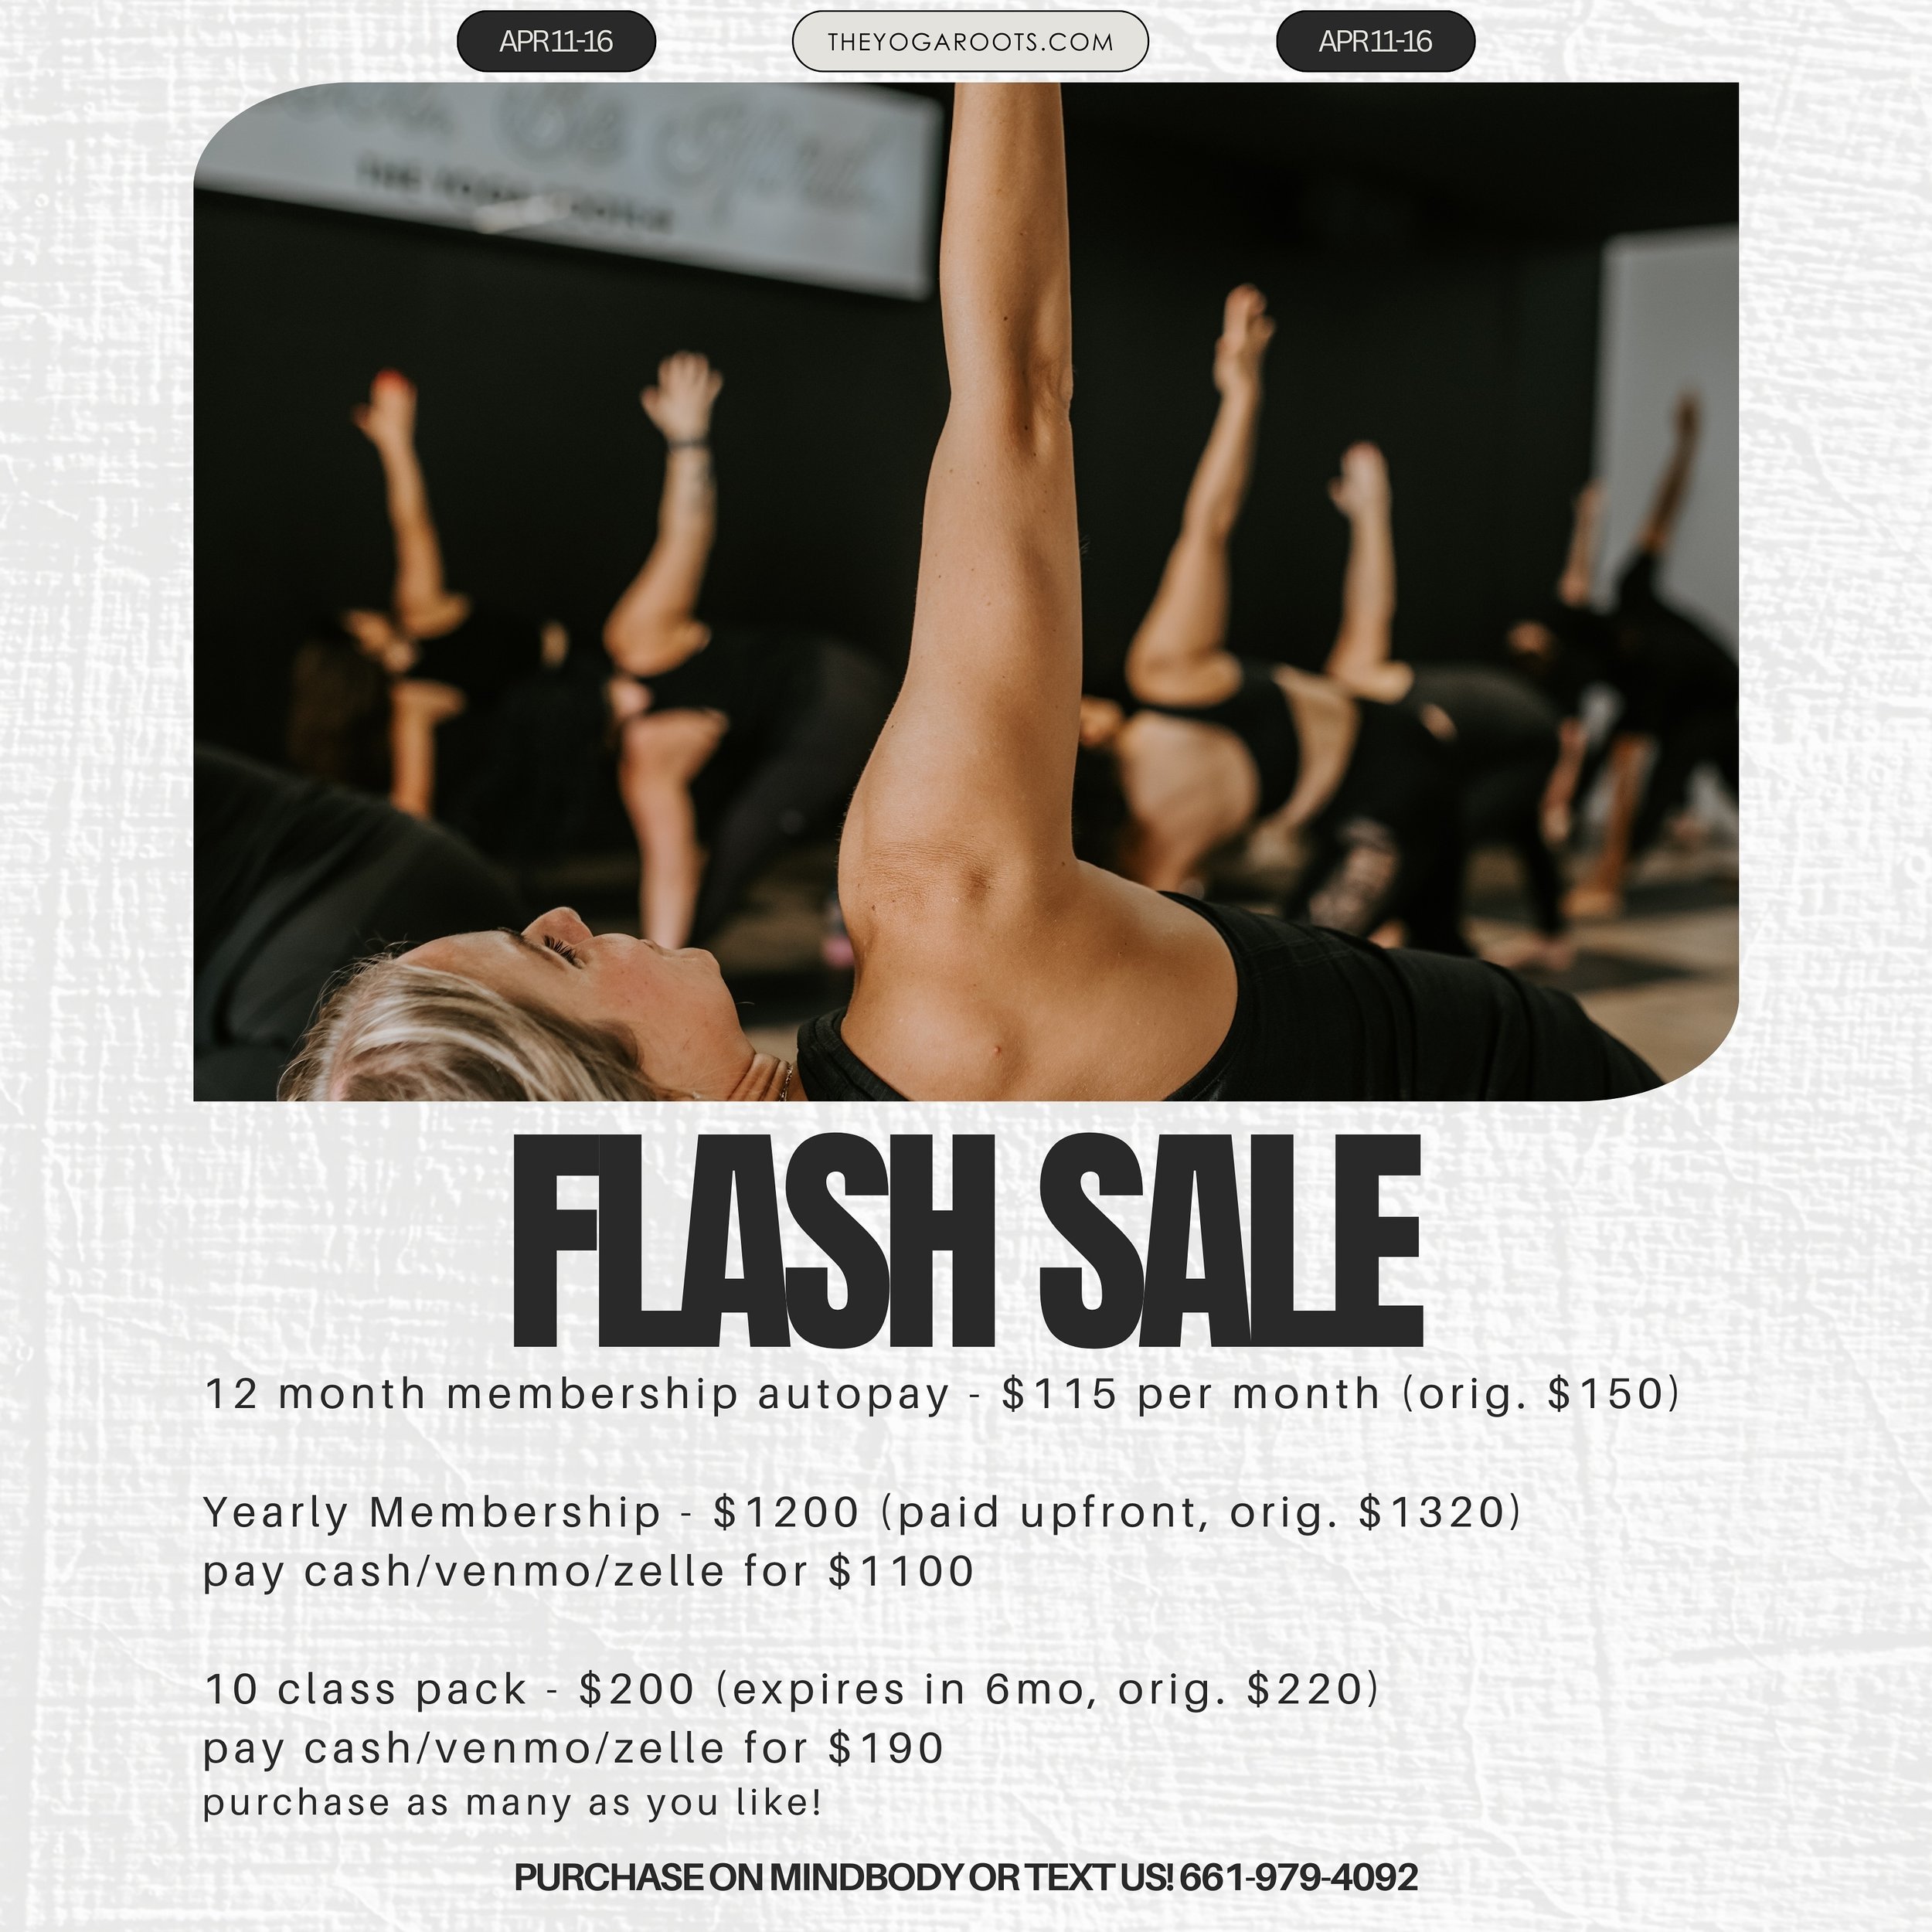 FLASH SALE! Ends on 4/16
Been thinking about signing up for membership?! NOWS THE TIME! Come sweat with us! 😏
Purchase on MINDBODY or text us now! 661-979-4092